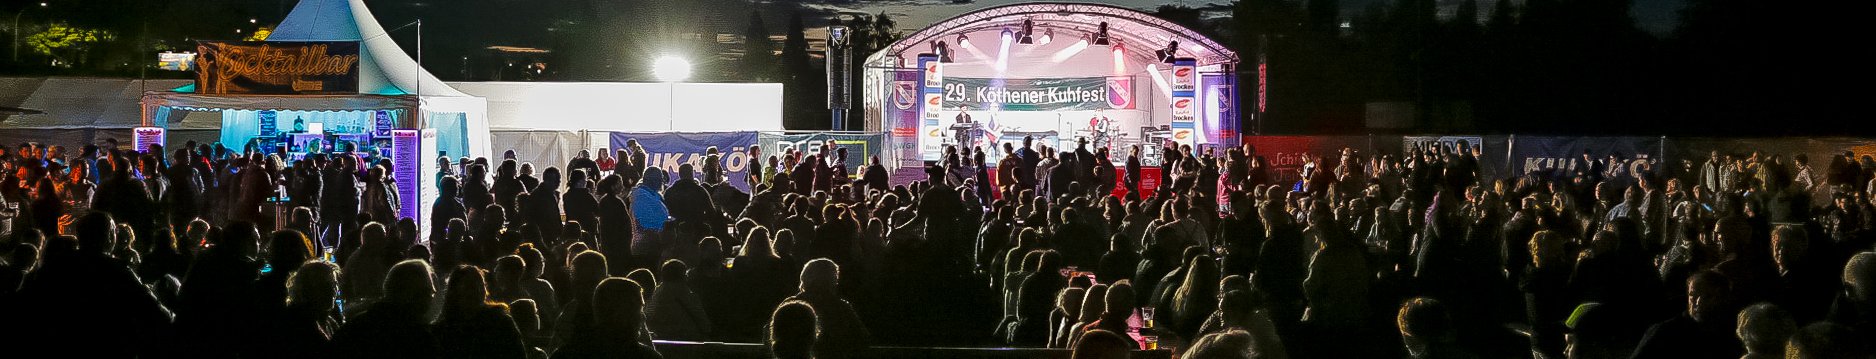 kuhfest 22